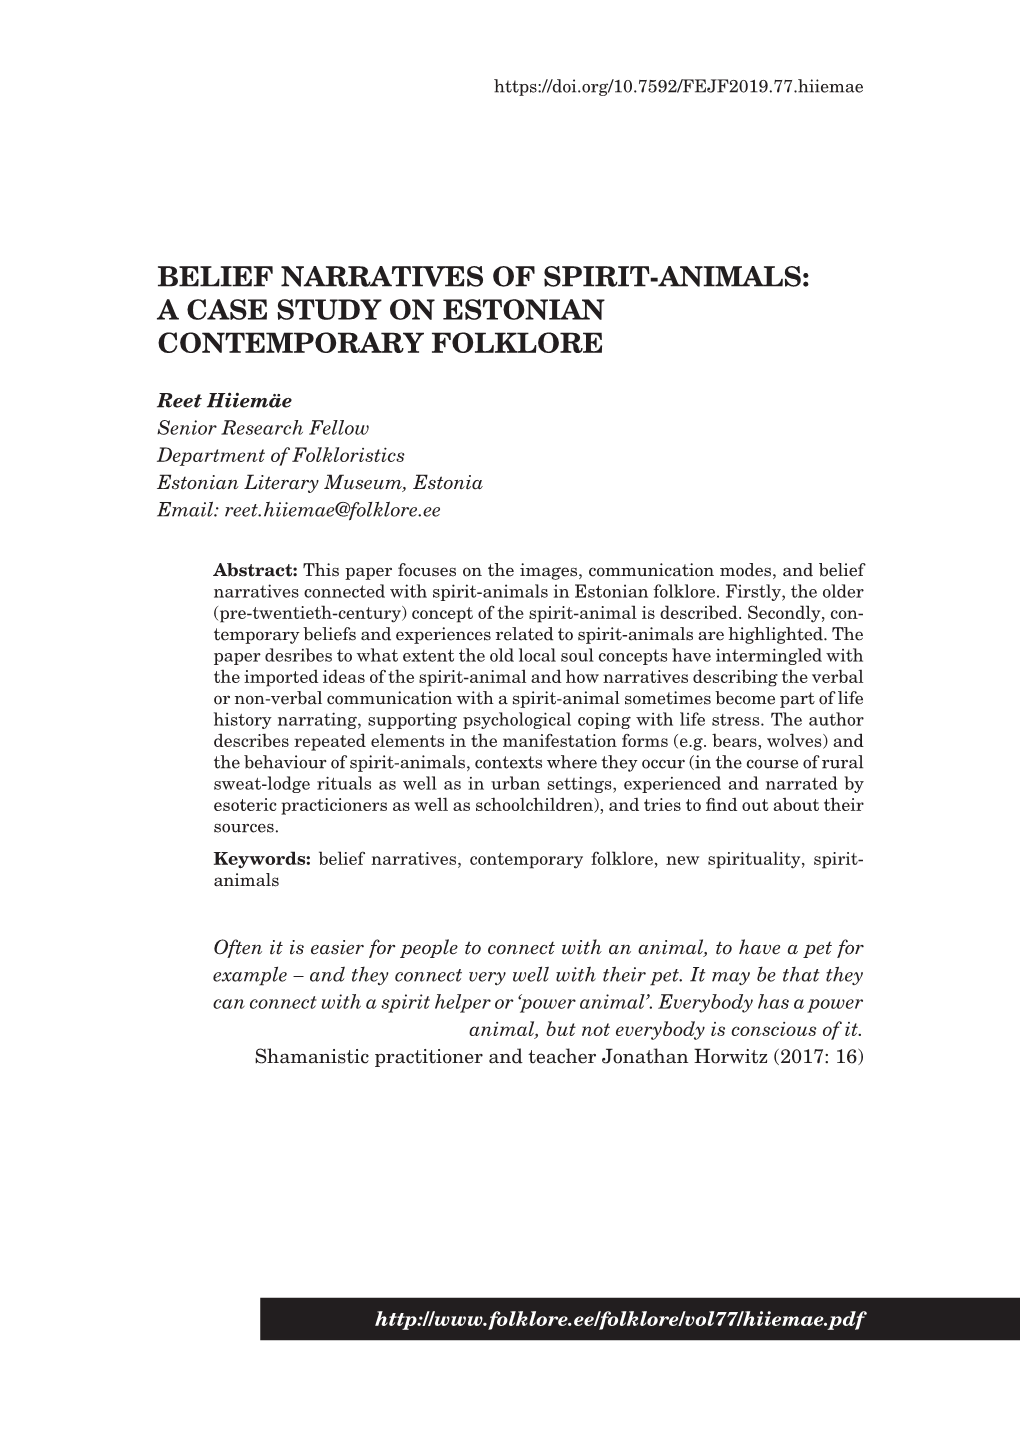 Belief Narratives of Spirit-Animals: a Case Study on Estonian Contemporary Folklore